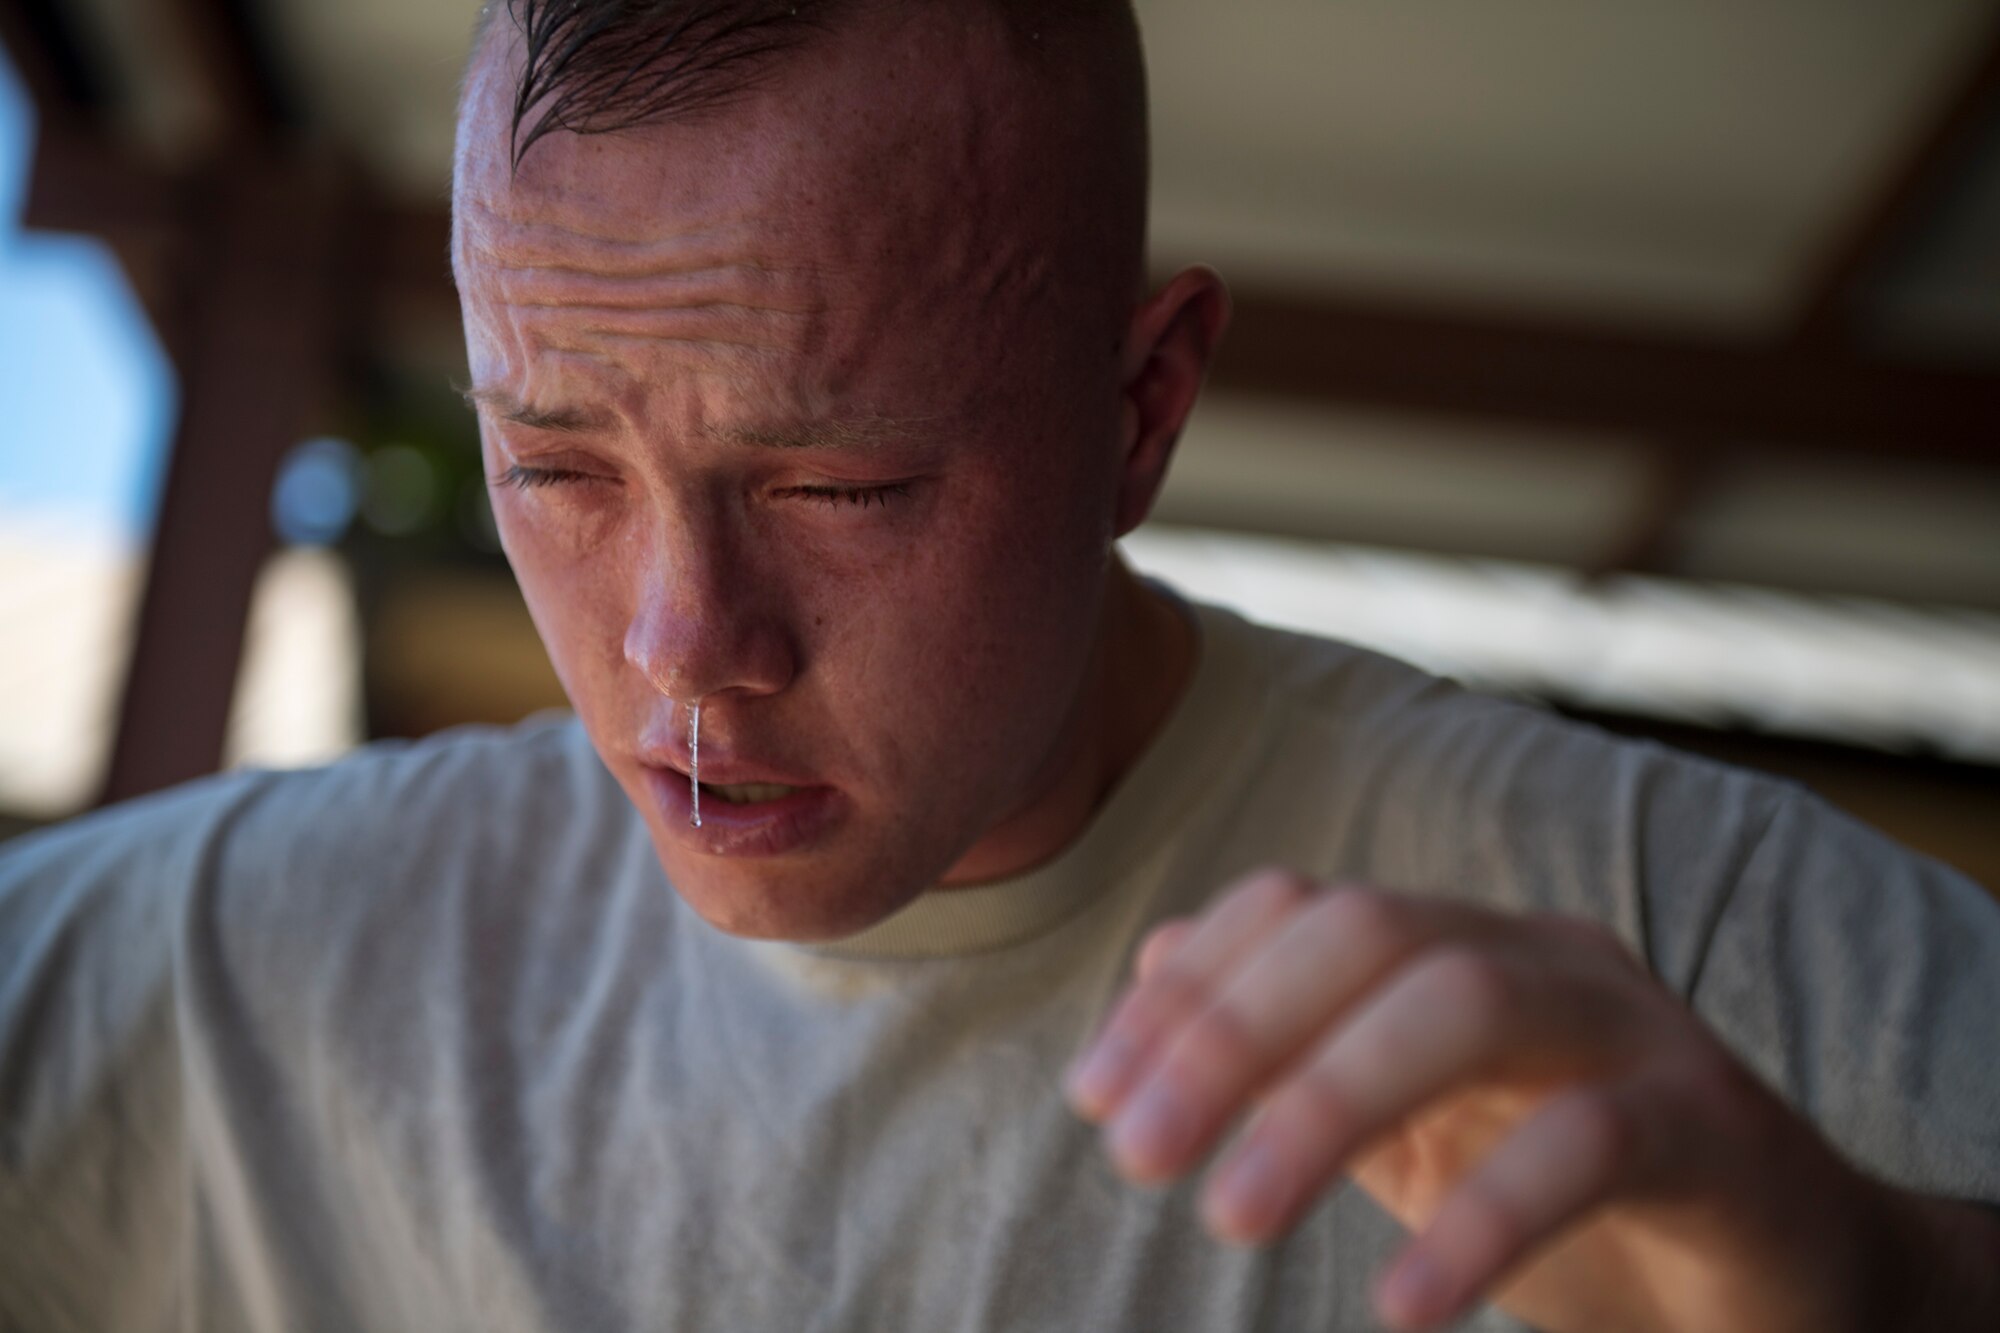 Airman 1st Class Hunter Ogle, 23d Security Forces Squadron entry controller, battles the effects of oleoresin capsicum spray, also known as pepper spray, May 2, 2017, at Moody Air Force Base, Ga. Airmen must complete a class then pass a physical confidence course while experiencing the effects of oleoresin capsicum spray to be qualified to carry the less-than-lethal tool. (Air Force photo by Airman 1st Class Daniel Snider)